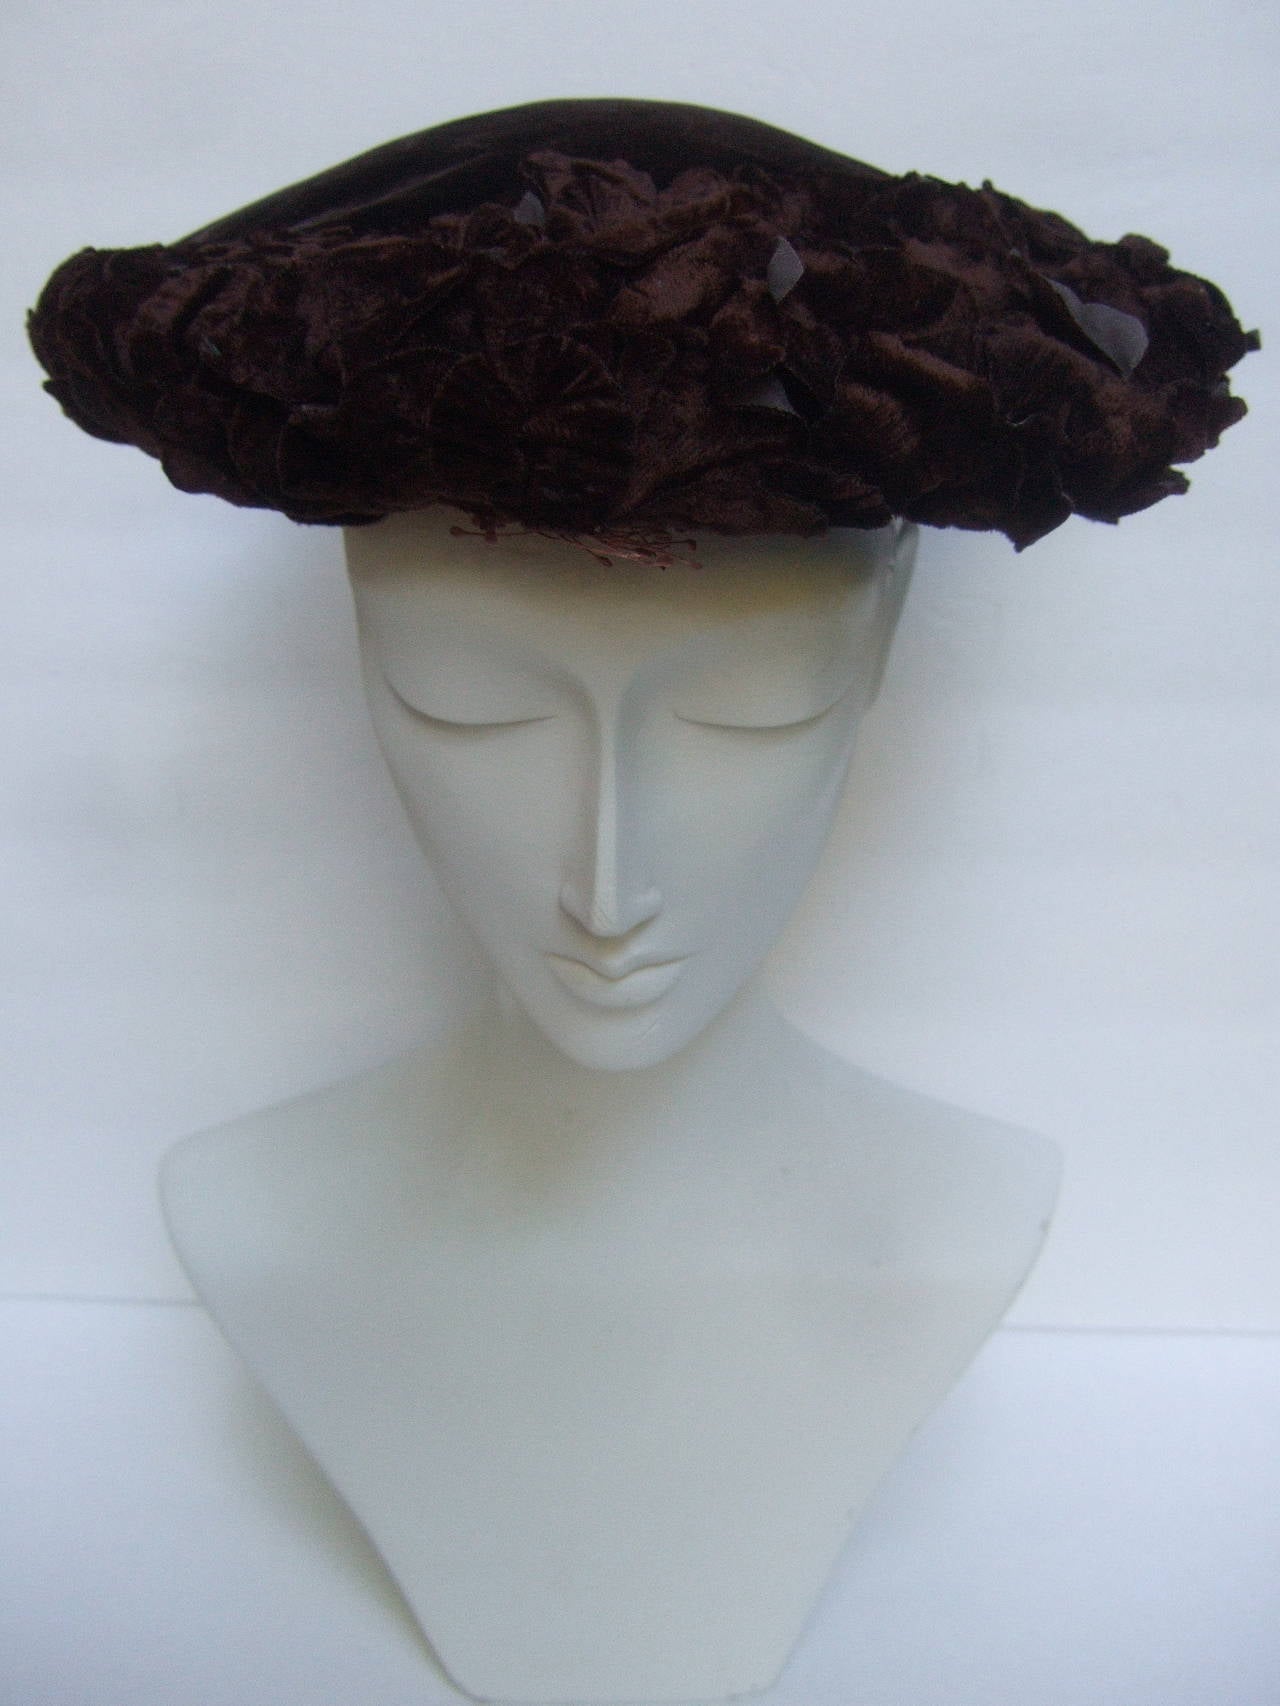 Brown velvet flower pedal hat for Neiman Marcus Made in Italy 
The stylish pancake style hat is designed with with plush
dark brown velvet. The handmade design is embellished 
with brown felt applique leaves that circle the edges 

The Italian